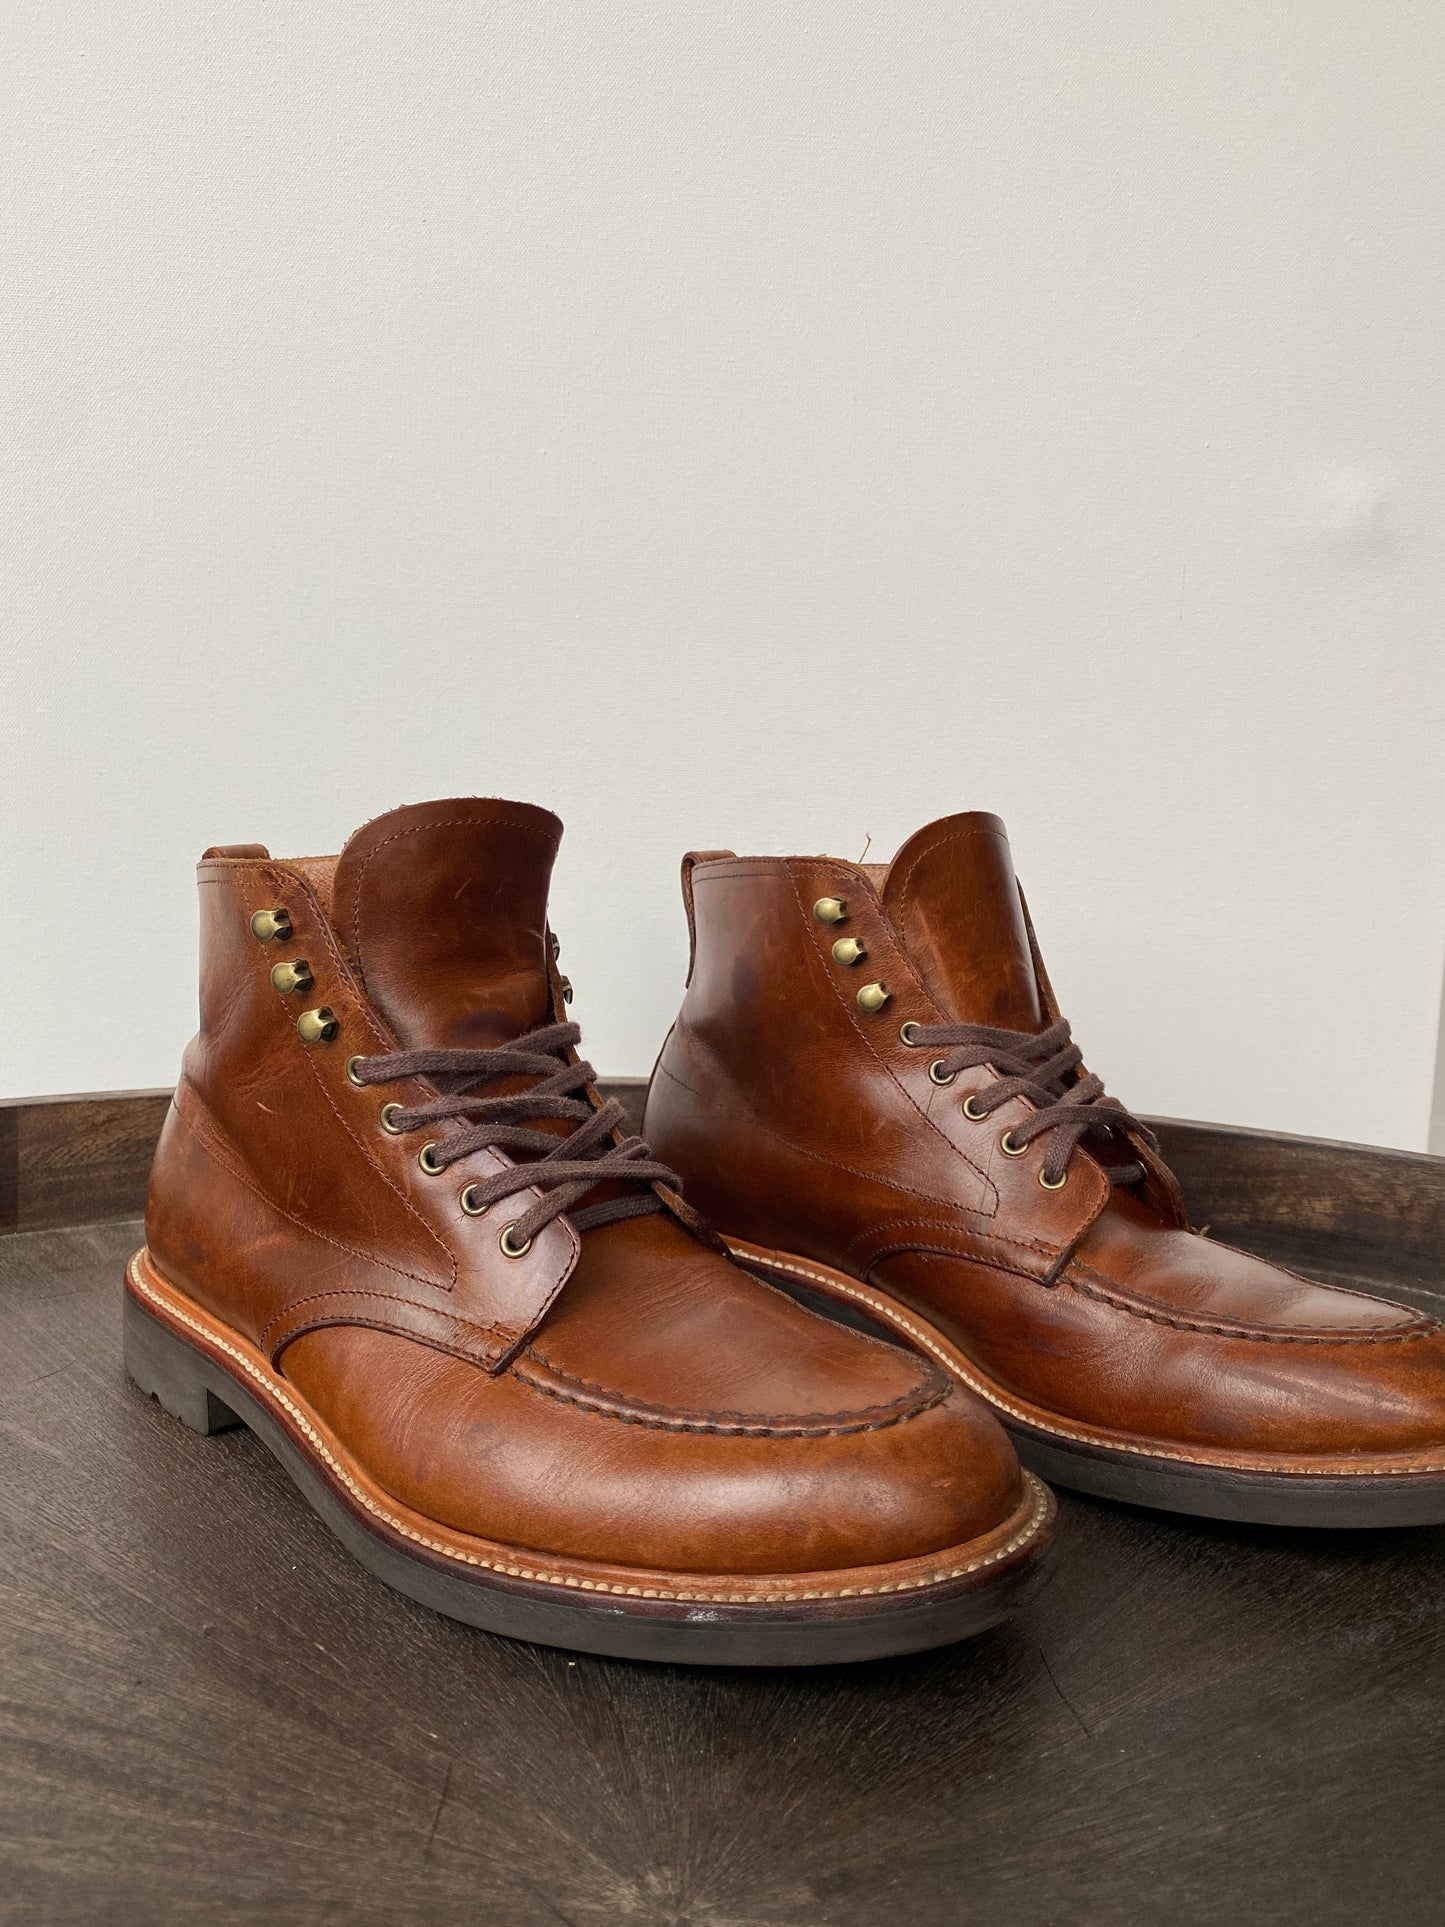 J Crew Leather Boots (9)